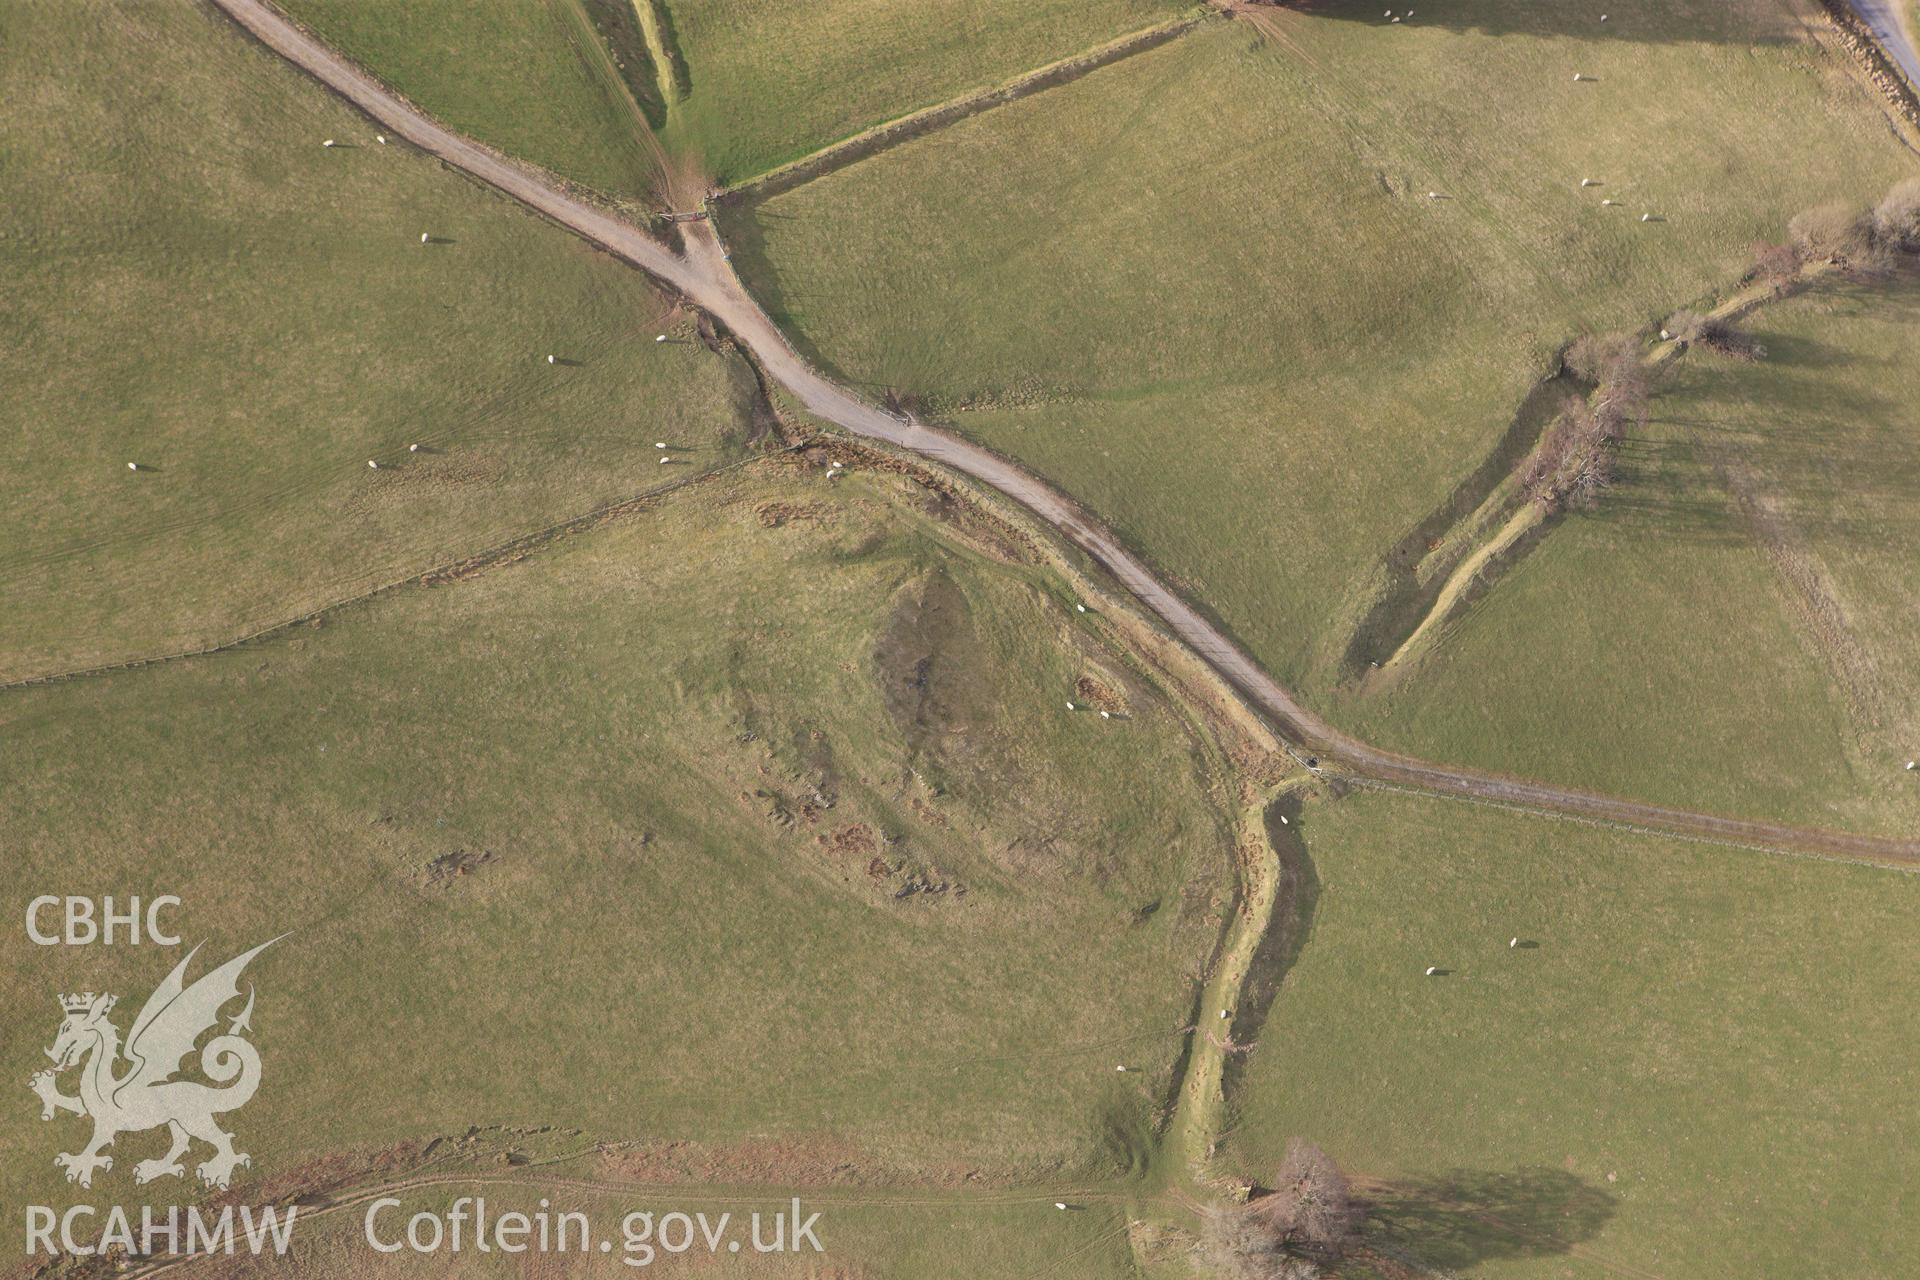 RCAHMW colour oblique photograph of Non-archaeological view showing agricultural earthworks, south of Llyn Clywedog Reservoir. Taken by Toby Driver on 22/03/2011.